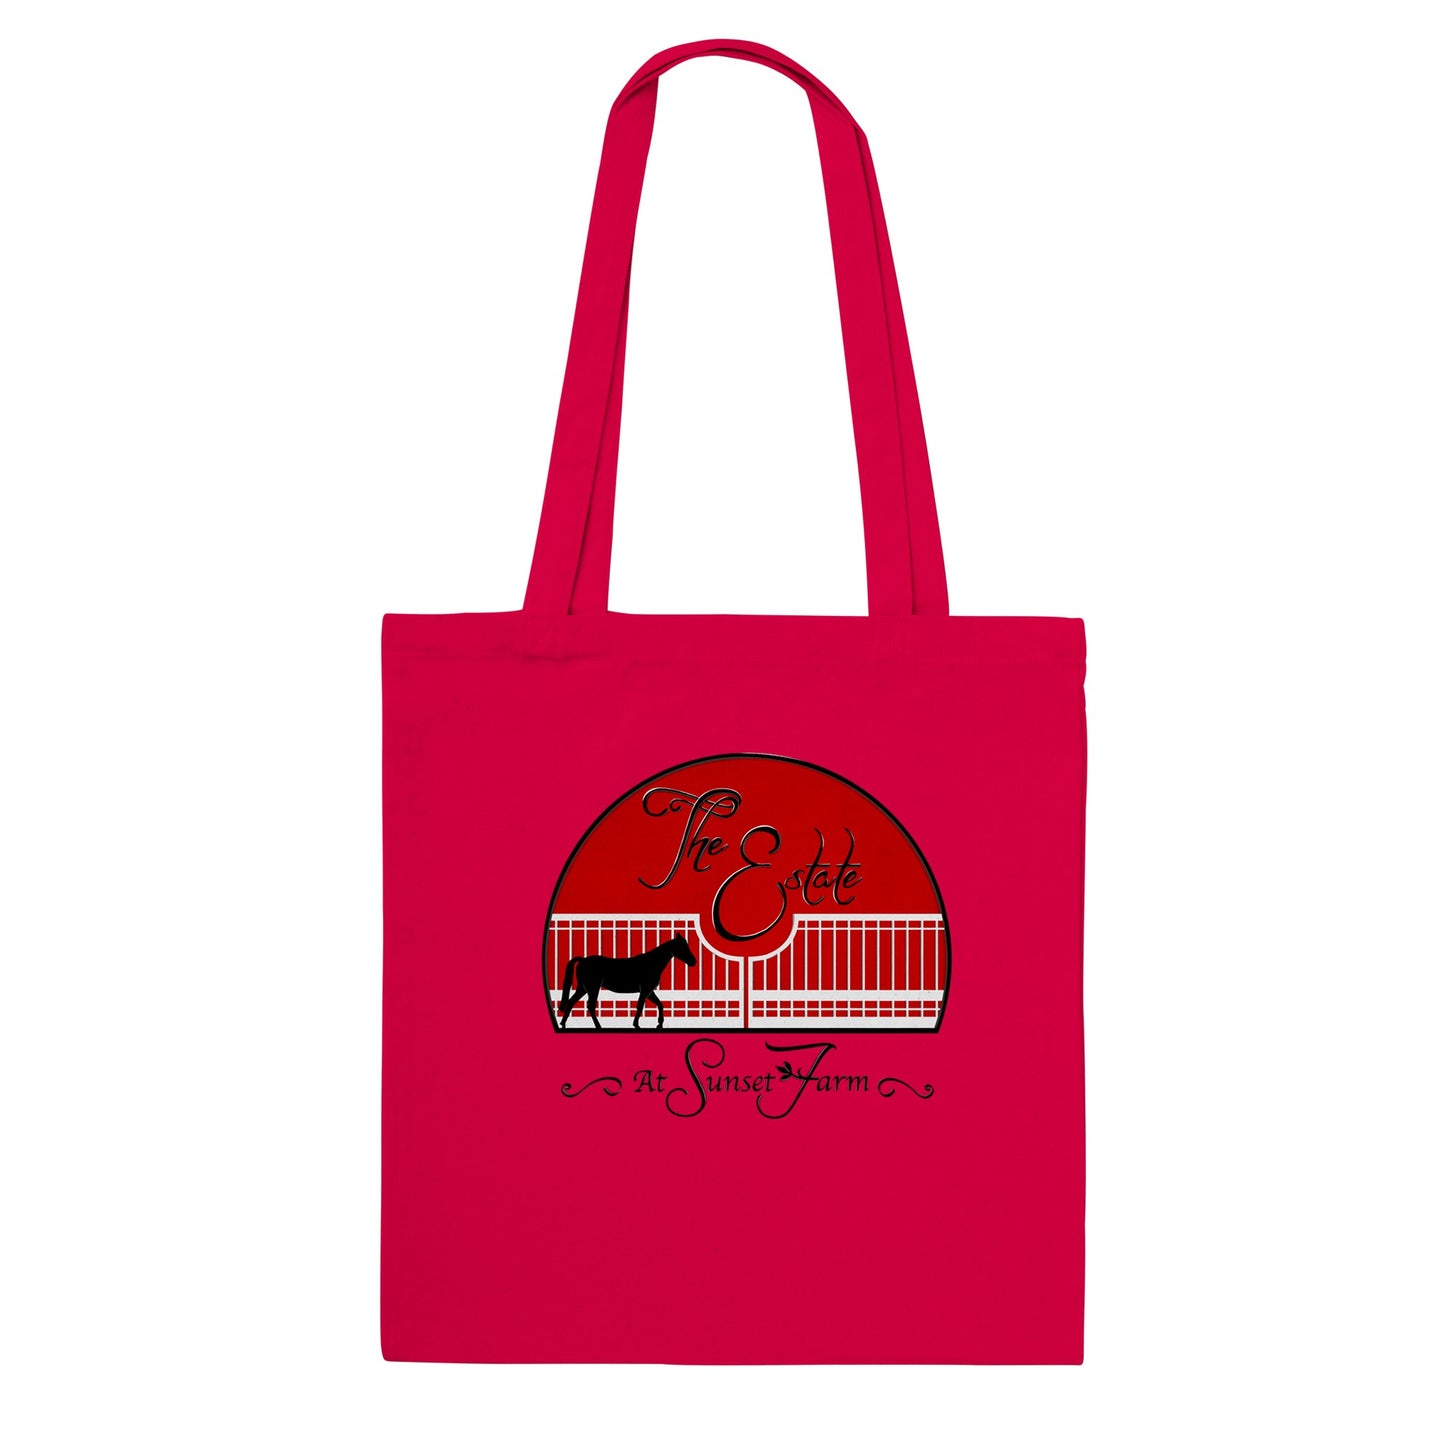 The Estate at Sunset Farms - Classic Tote Bag